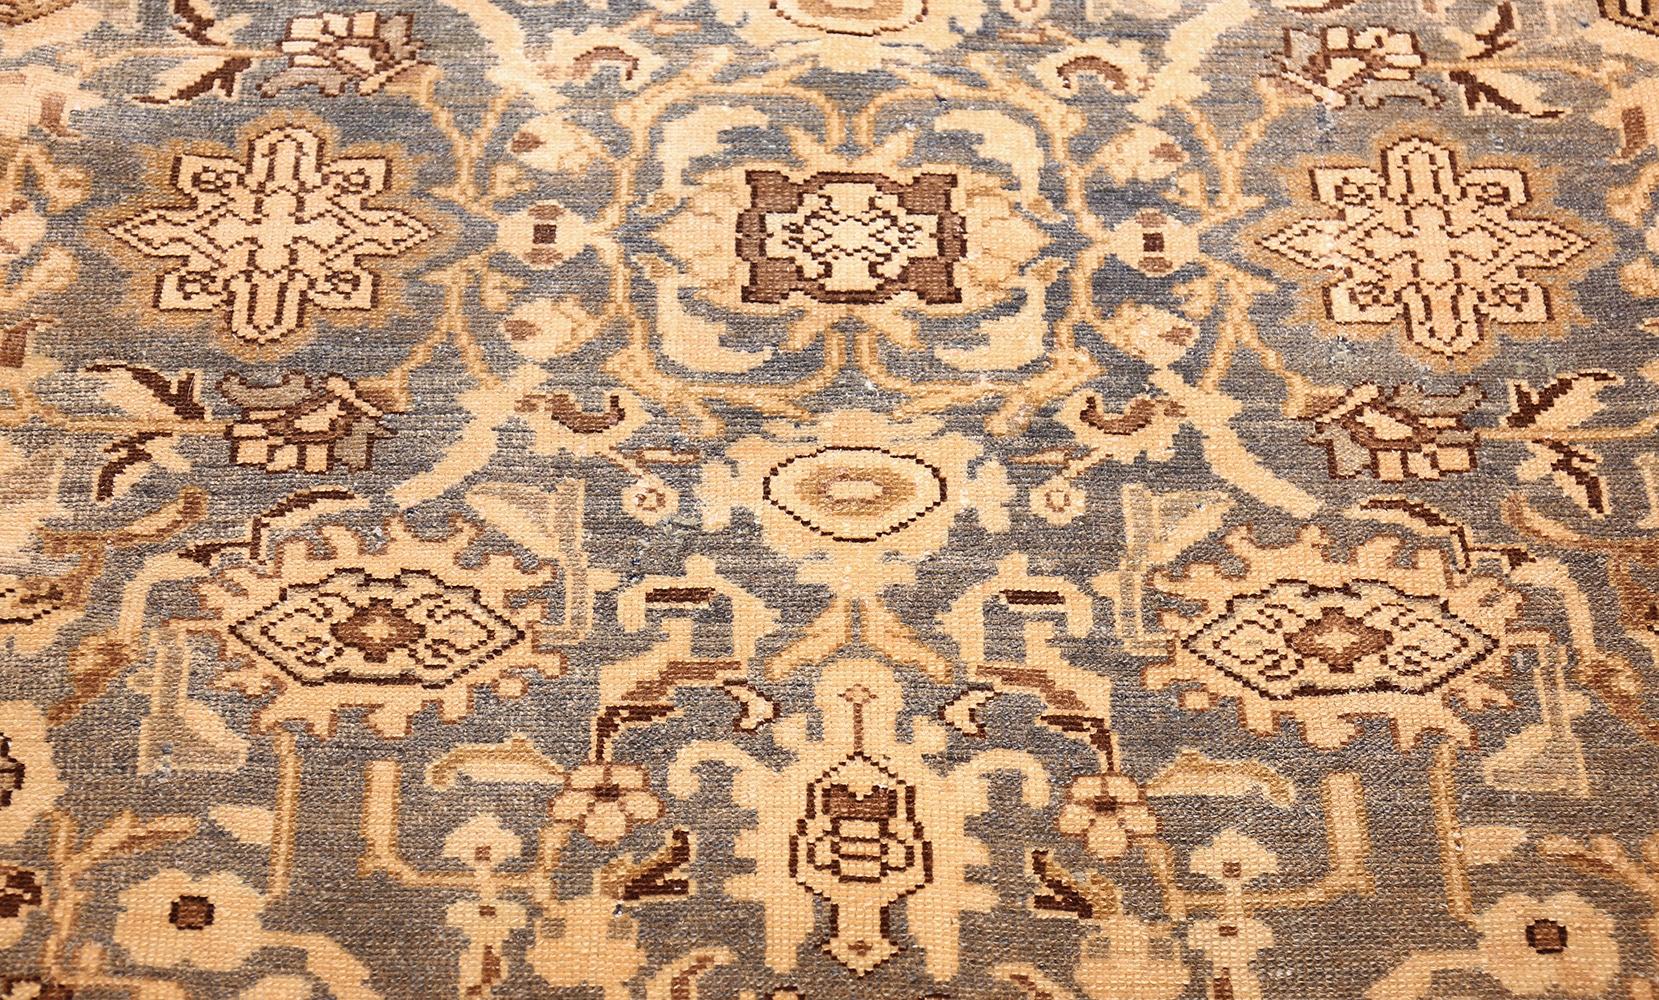 Antique Malayer rug, Persia, circa first quarter of the 20th century. Size: 10 ft 5 in x 13 ft 8 in (3.17 m x 4.17 m)

Exceeding the humble village designs and dimensions that Malayer rugs are prized for, this antique room-sized Persian carpet